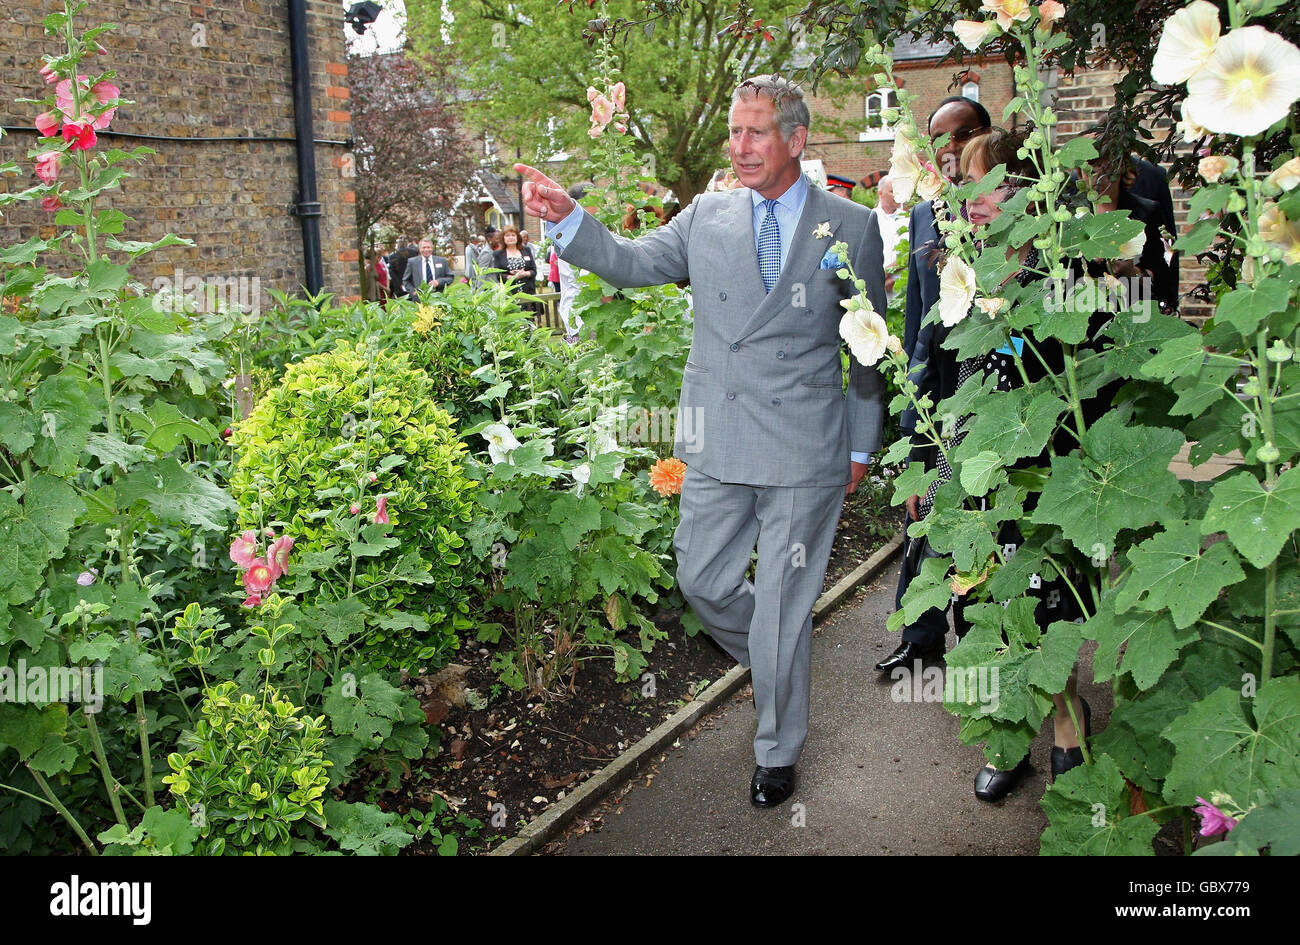 The Prince of Wales, centre, patron of the Almshouse Association, walks through an allotment during a visit to St Pancras almshouses in north London to celebrate the 150th anniversary of the Almshouses. Stock Photo